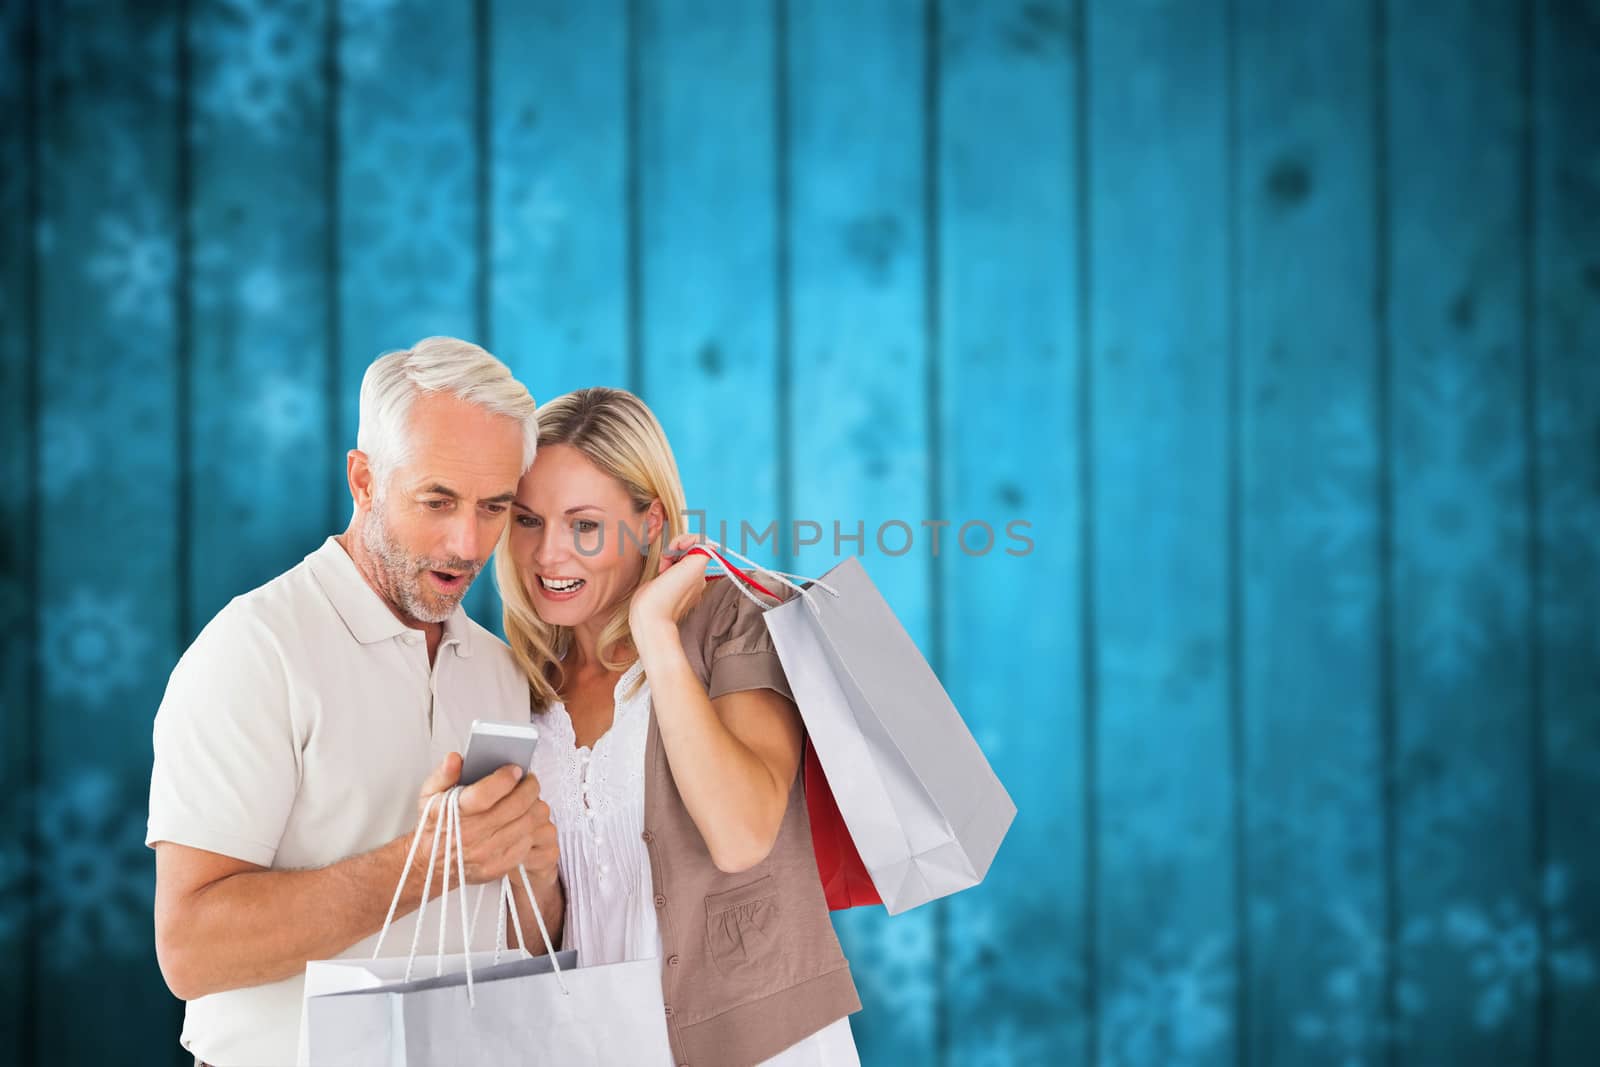 Happy couple with shopping bags and smartphone against blurred snowflakes on planks